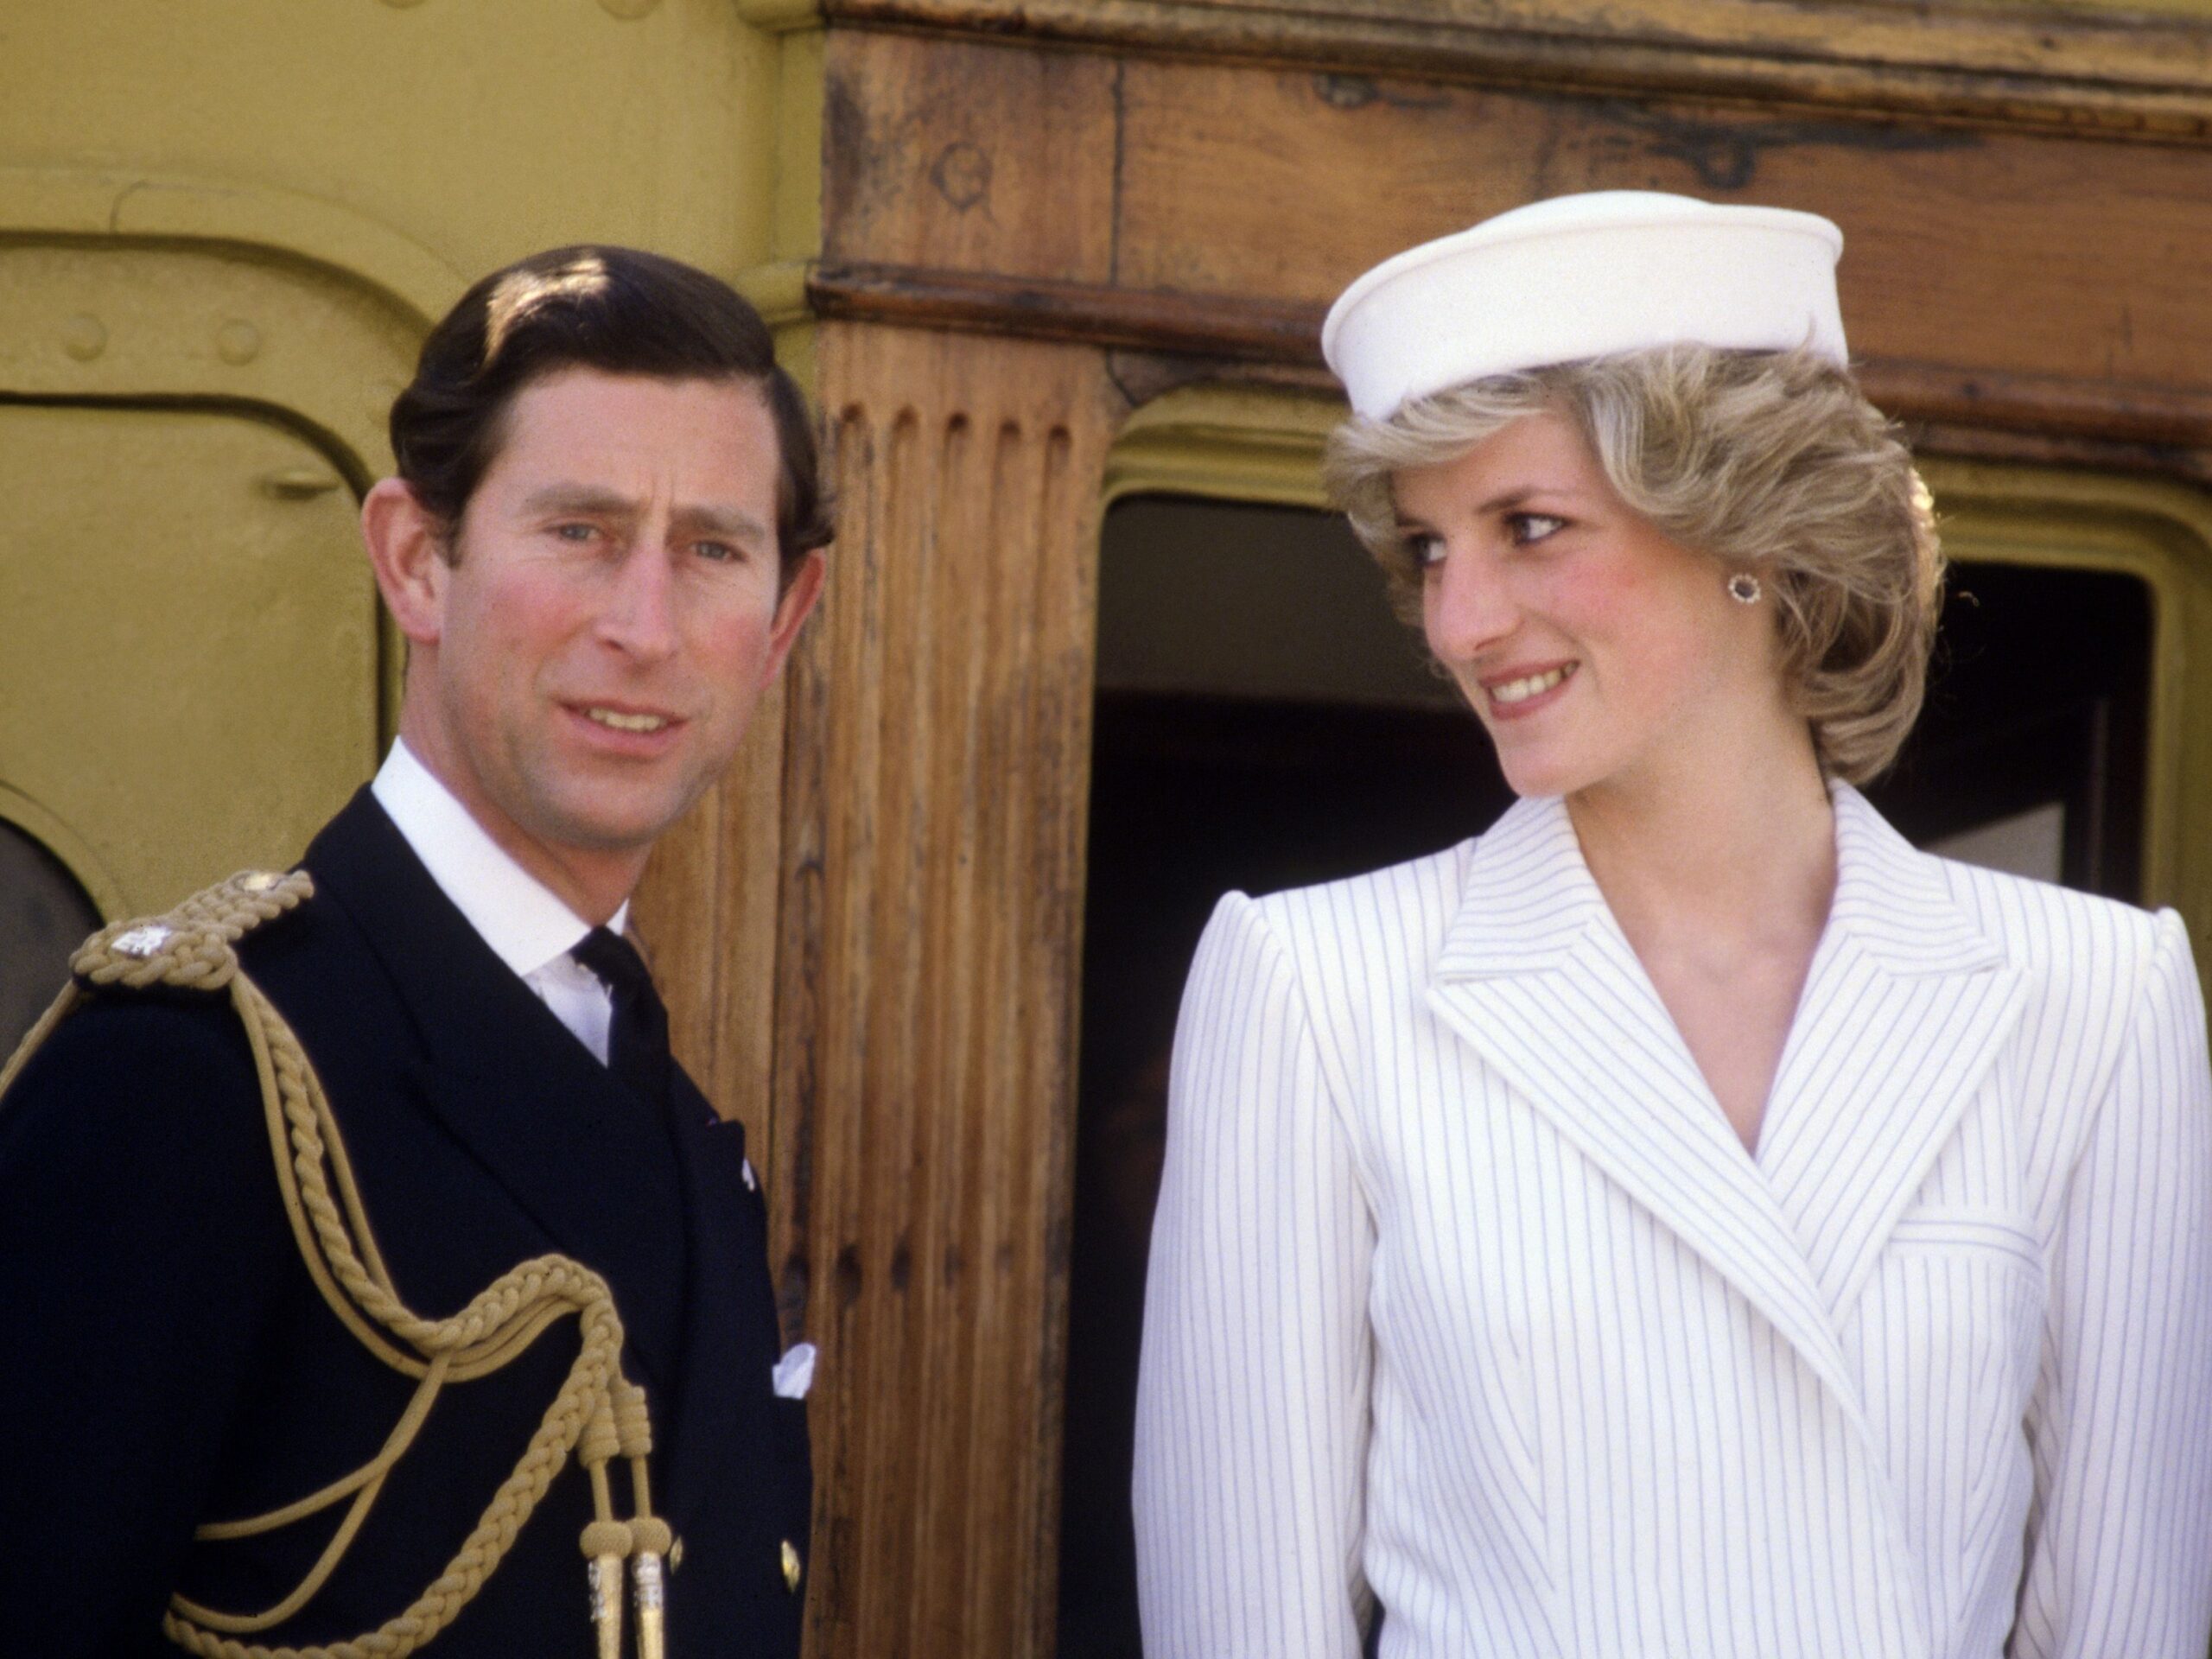 King Charles in 'subtle mention' to Princess Diana as he welcomes Kate to new role